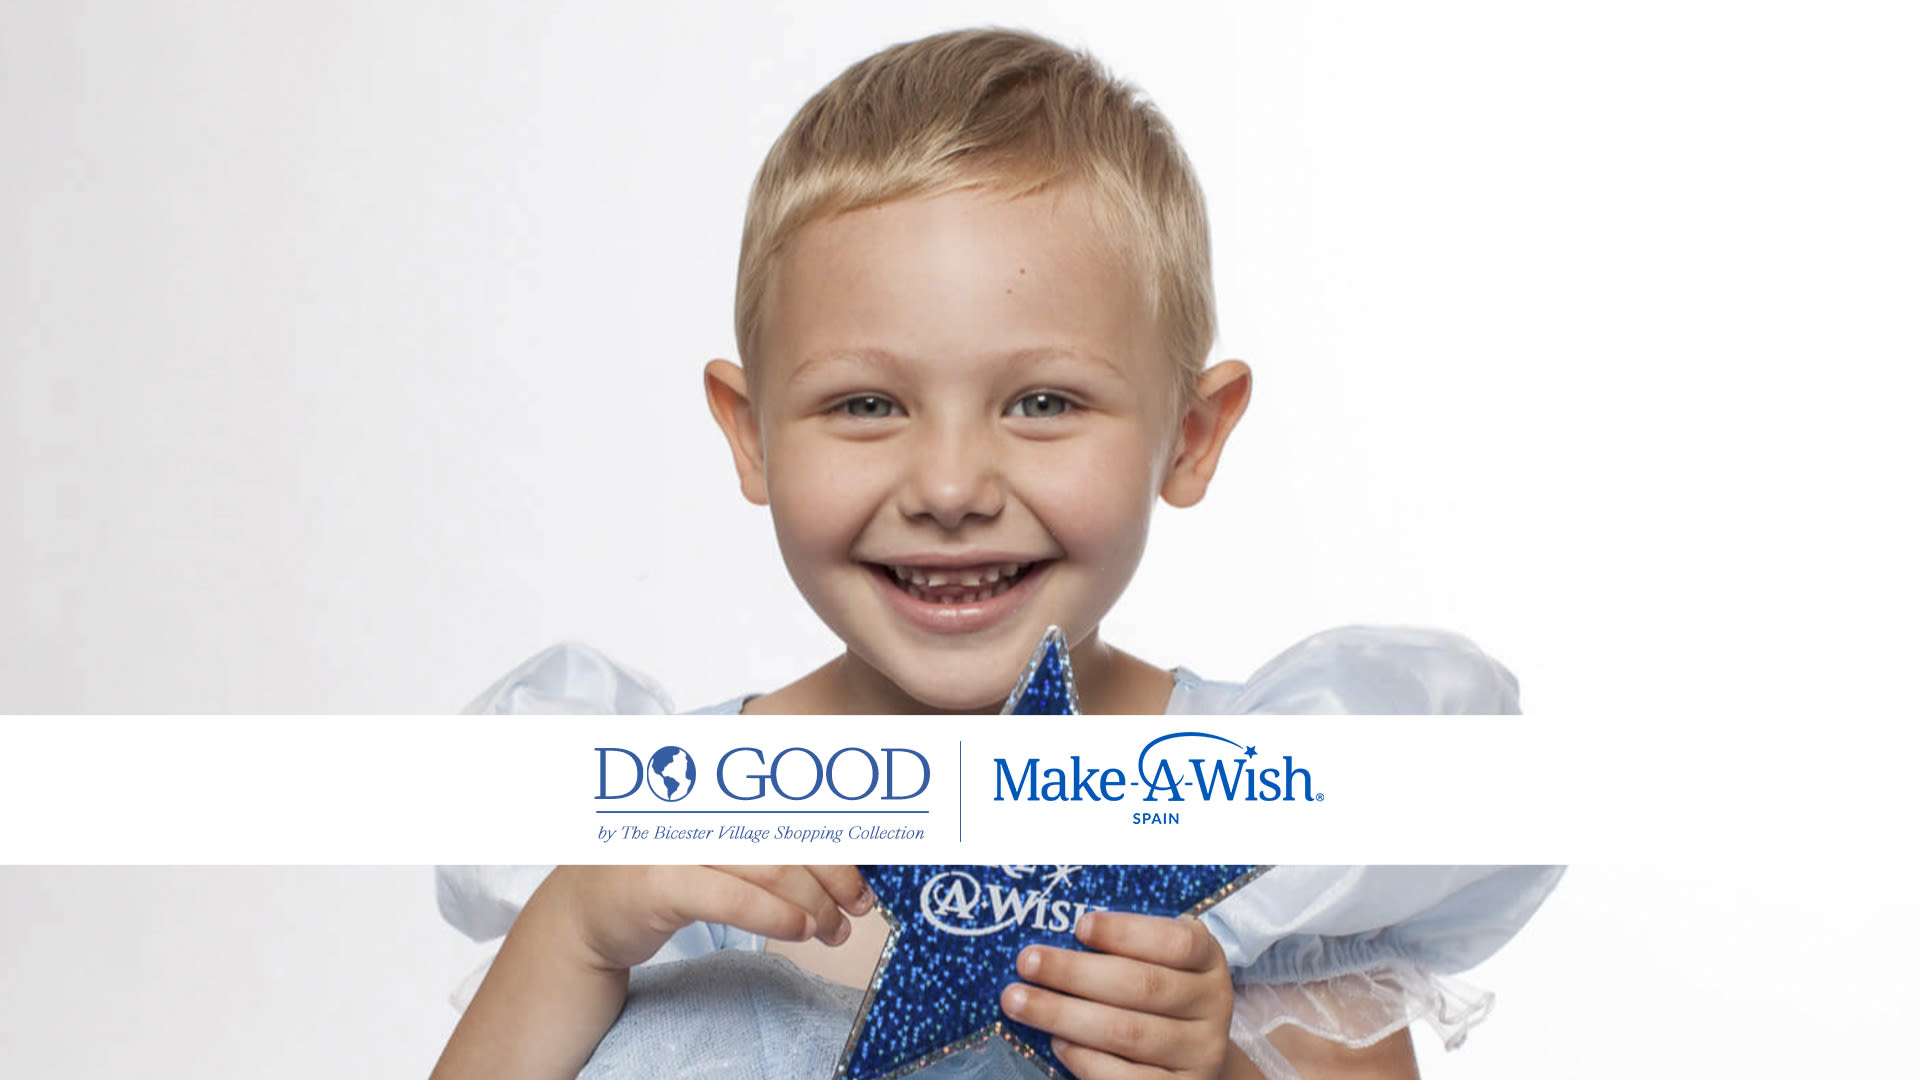 La Roca Village is proud to partner with Make-A-Wish Spain®